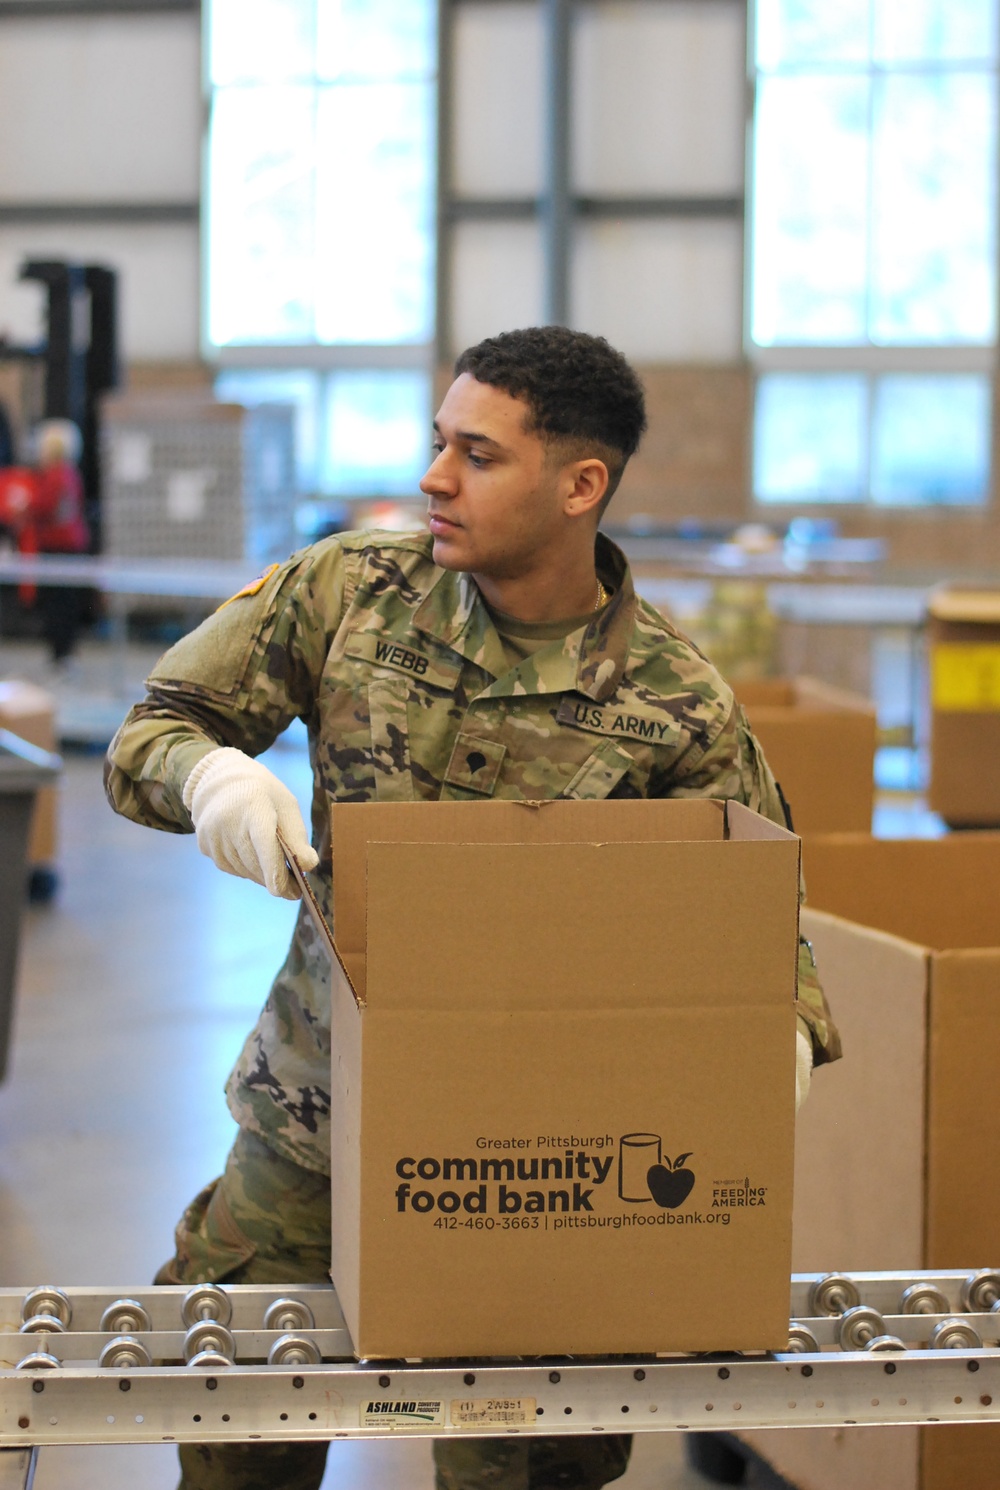 Service members from the 128th BSB provide support in cooperation with the Greater Pittsburgh Community Food Bank